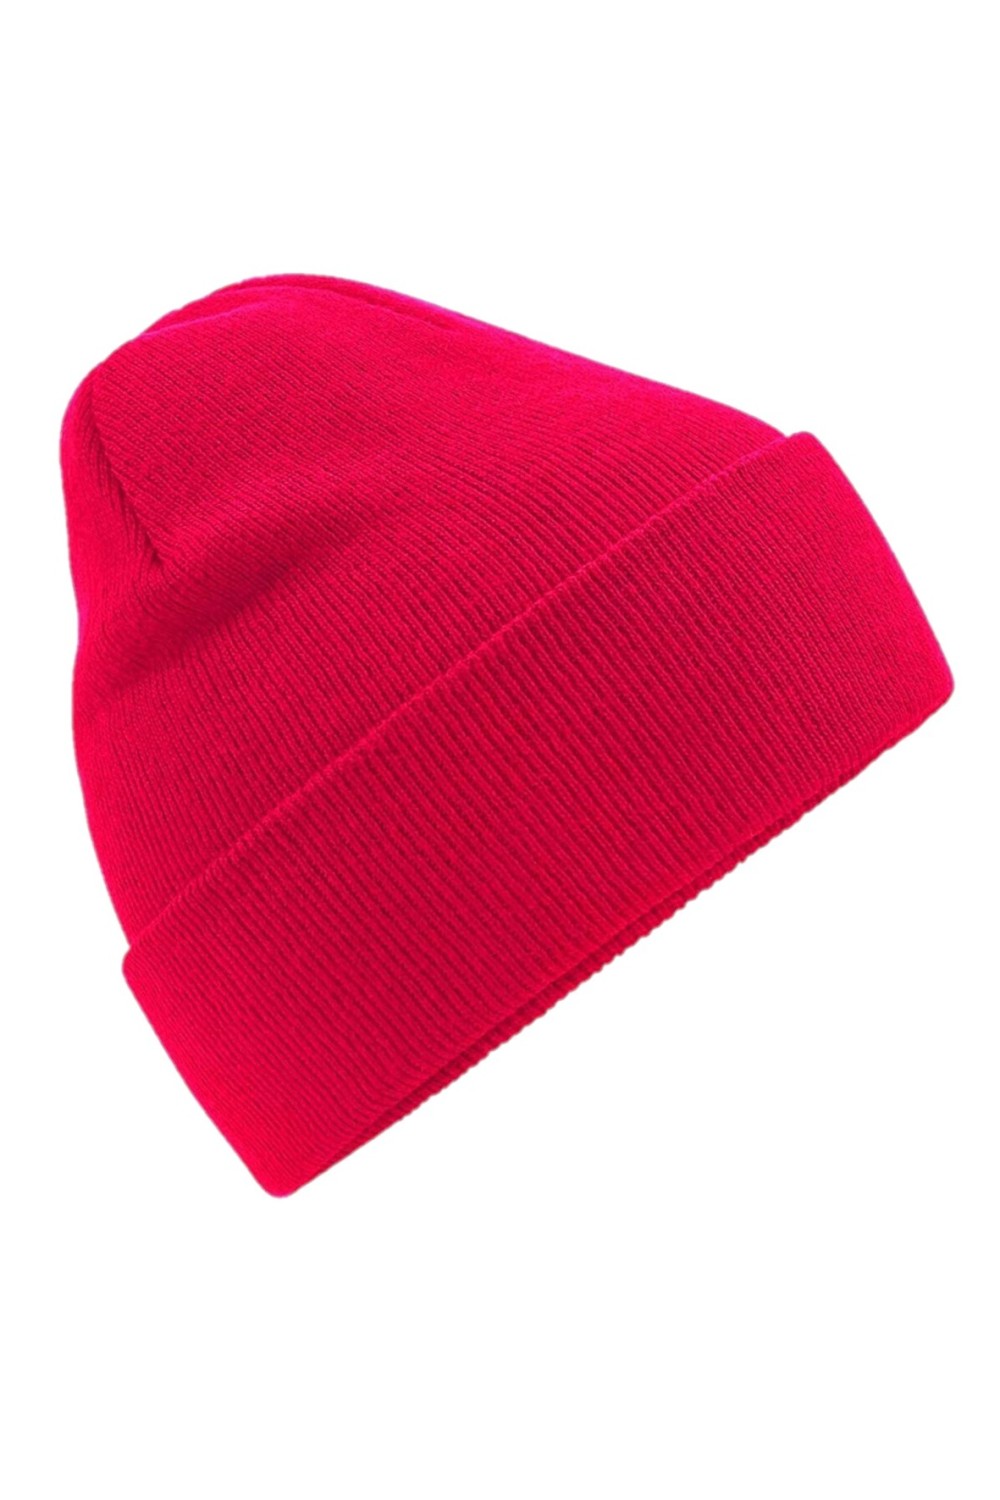 Unisex Adult Original Recycled Beanie - Classic Red